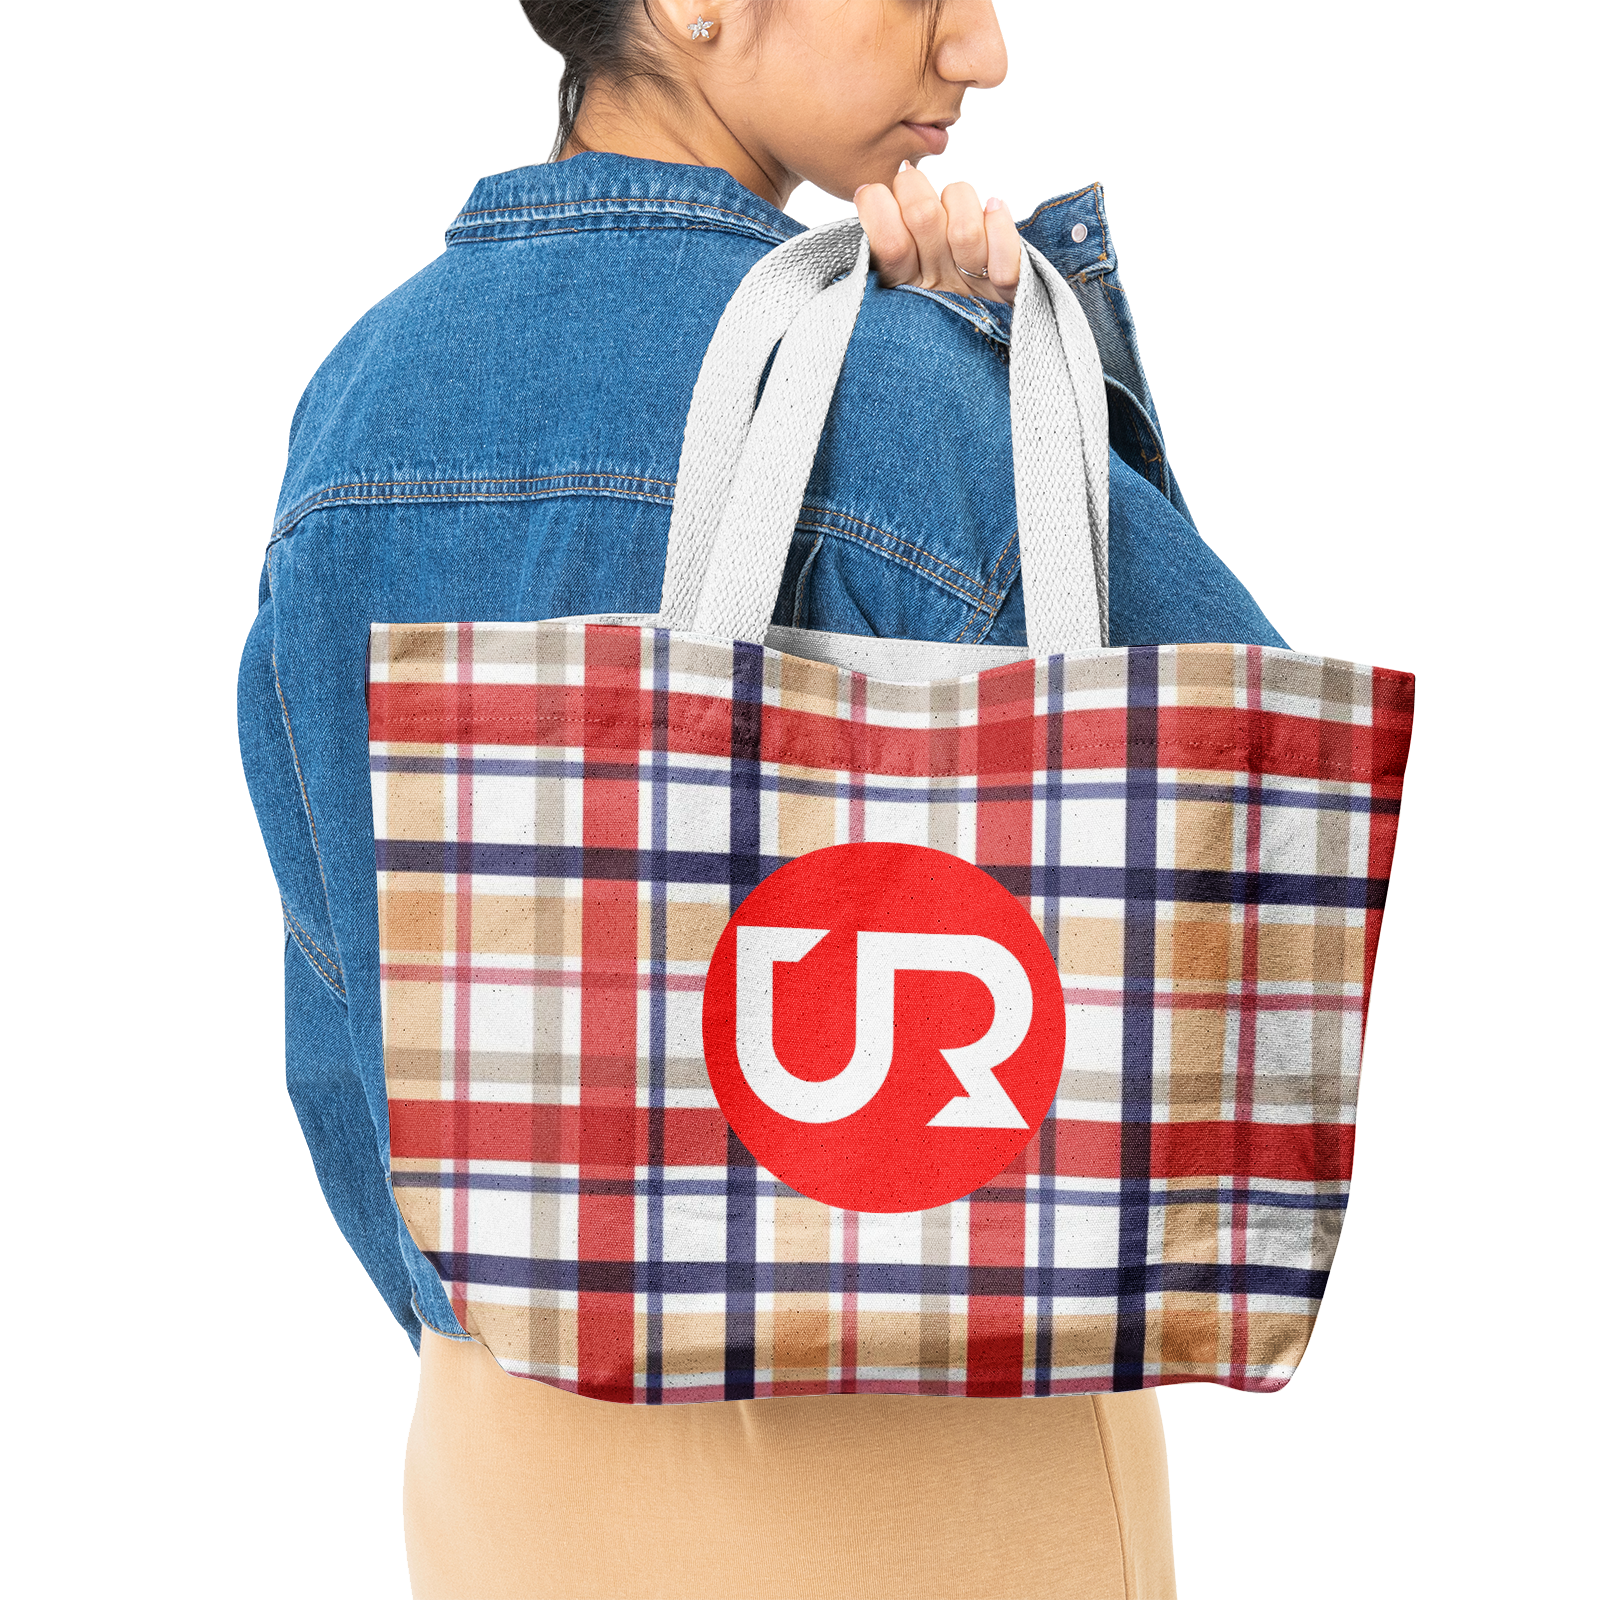 Heavy Duty and Strong Natural Cotton Canvas Tote Bag - UGO ROMANO URTB072